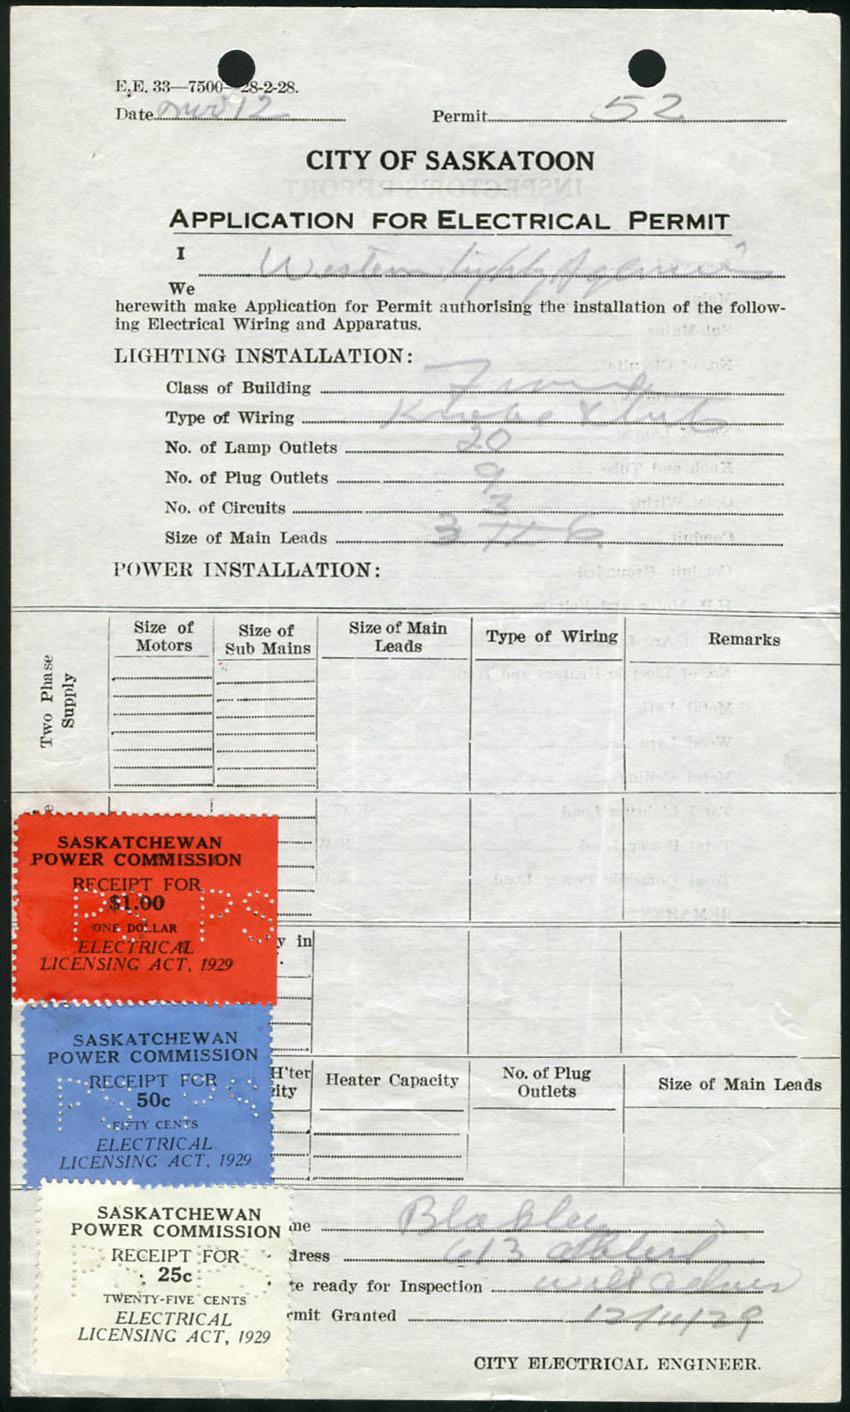 1929 Saskatchewan City of Saskatoon Application for Electrical Permit. The $1.75 fee is paid with a complete set of SE6-8 - 25c, 50c and $1.